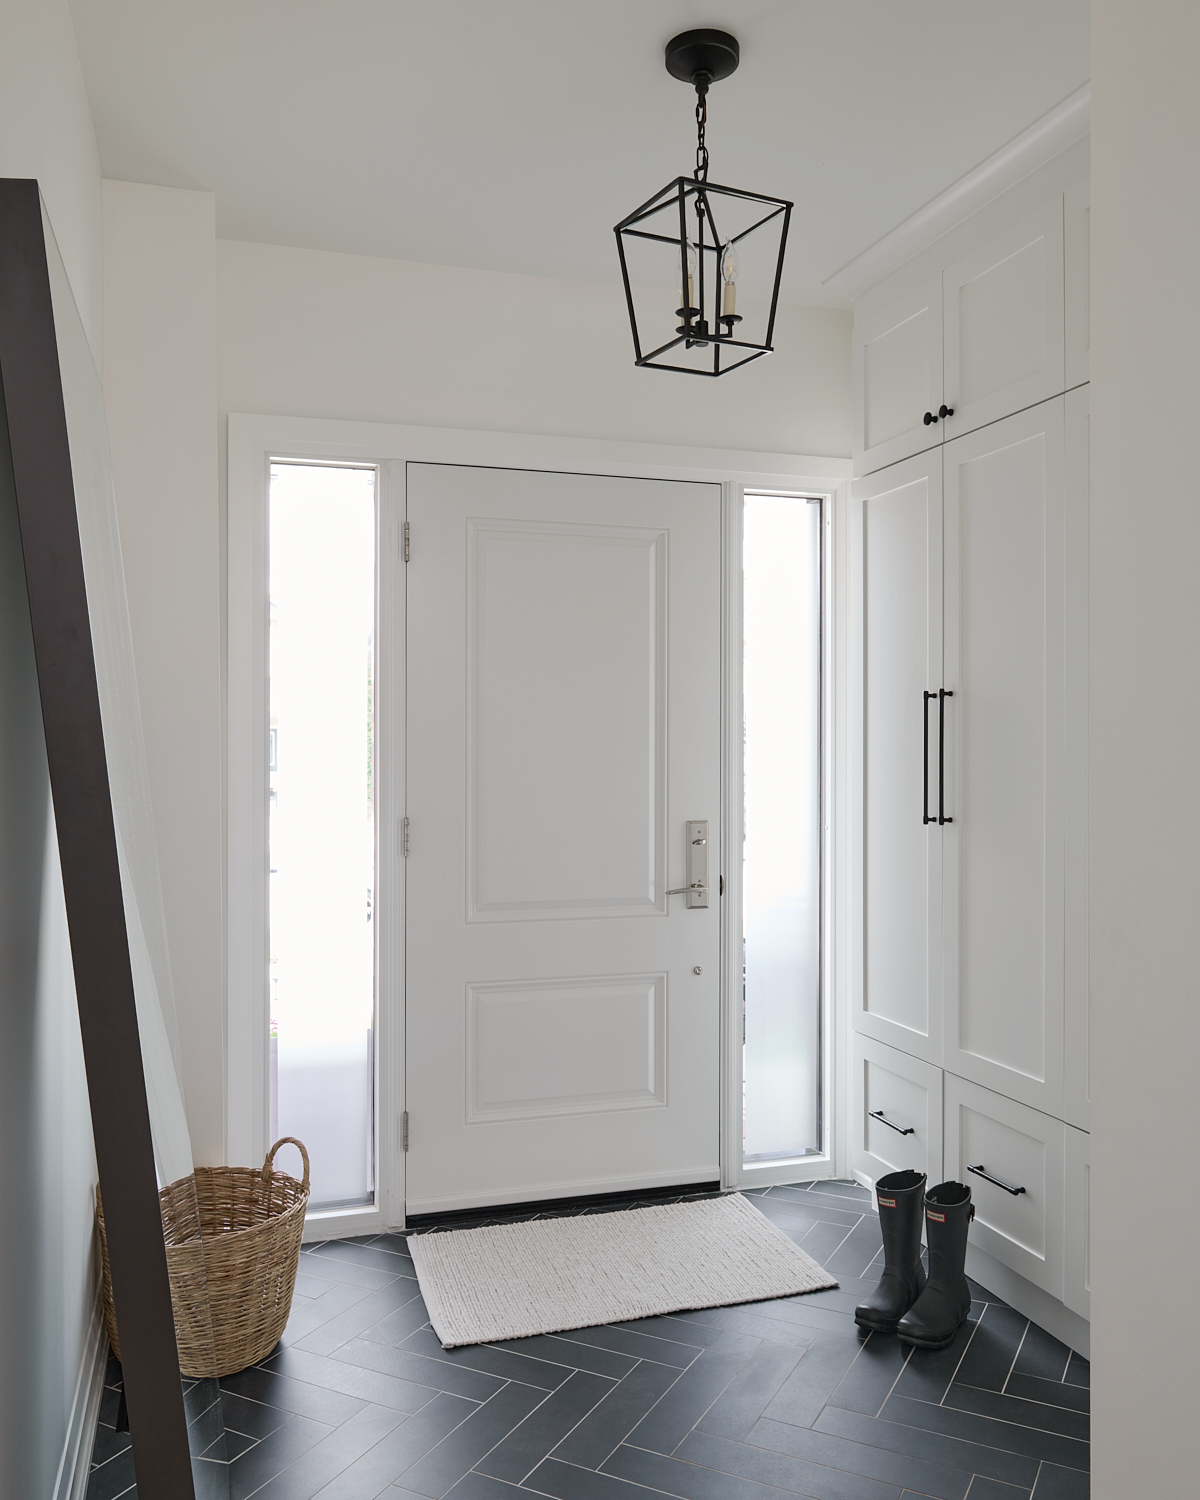 Foyer with white walls and cabinetry and dark herringbone tiled floors